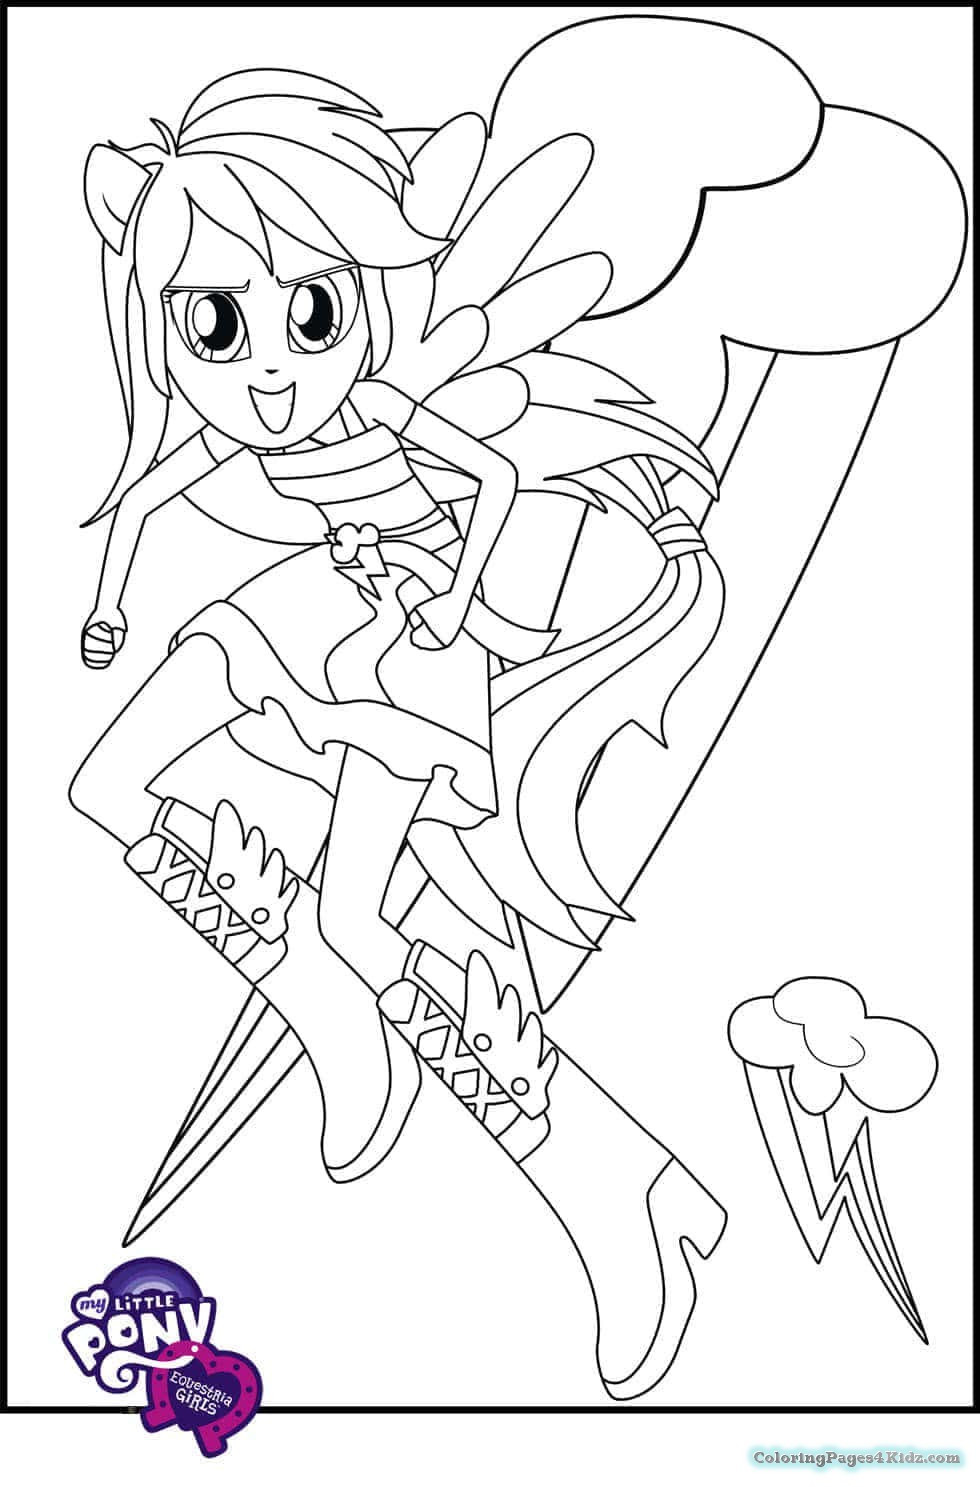 Rainbow Rock Coloring Pages
 My Little Pony Equestria Girls Rainbow Rocks Coloring